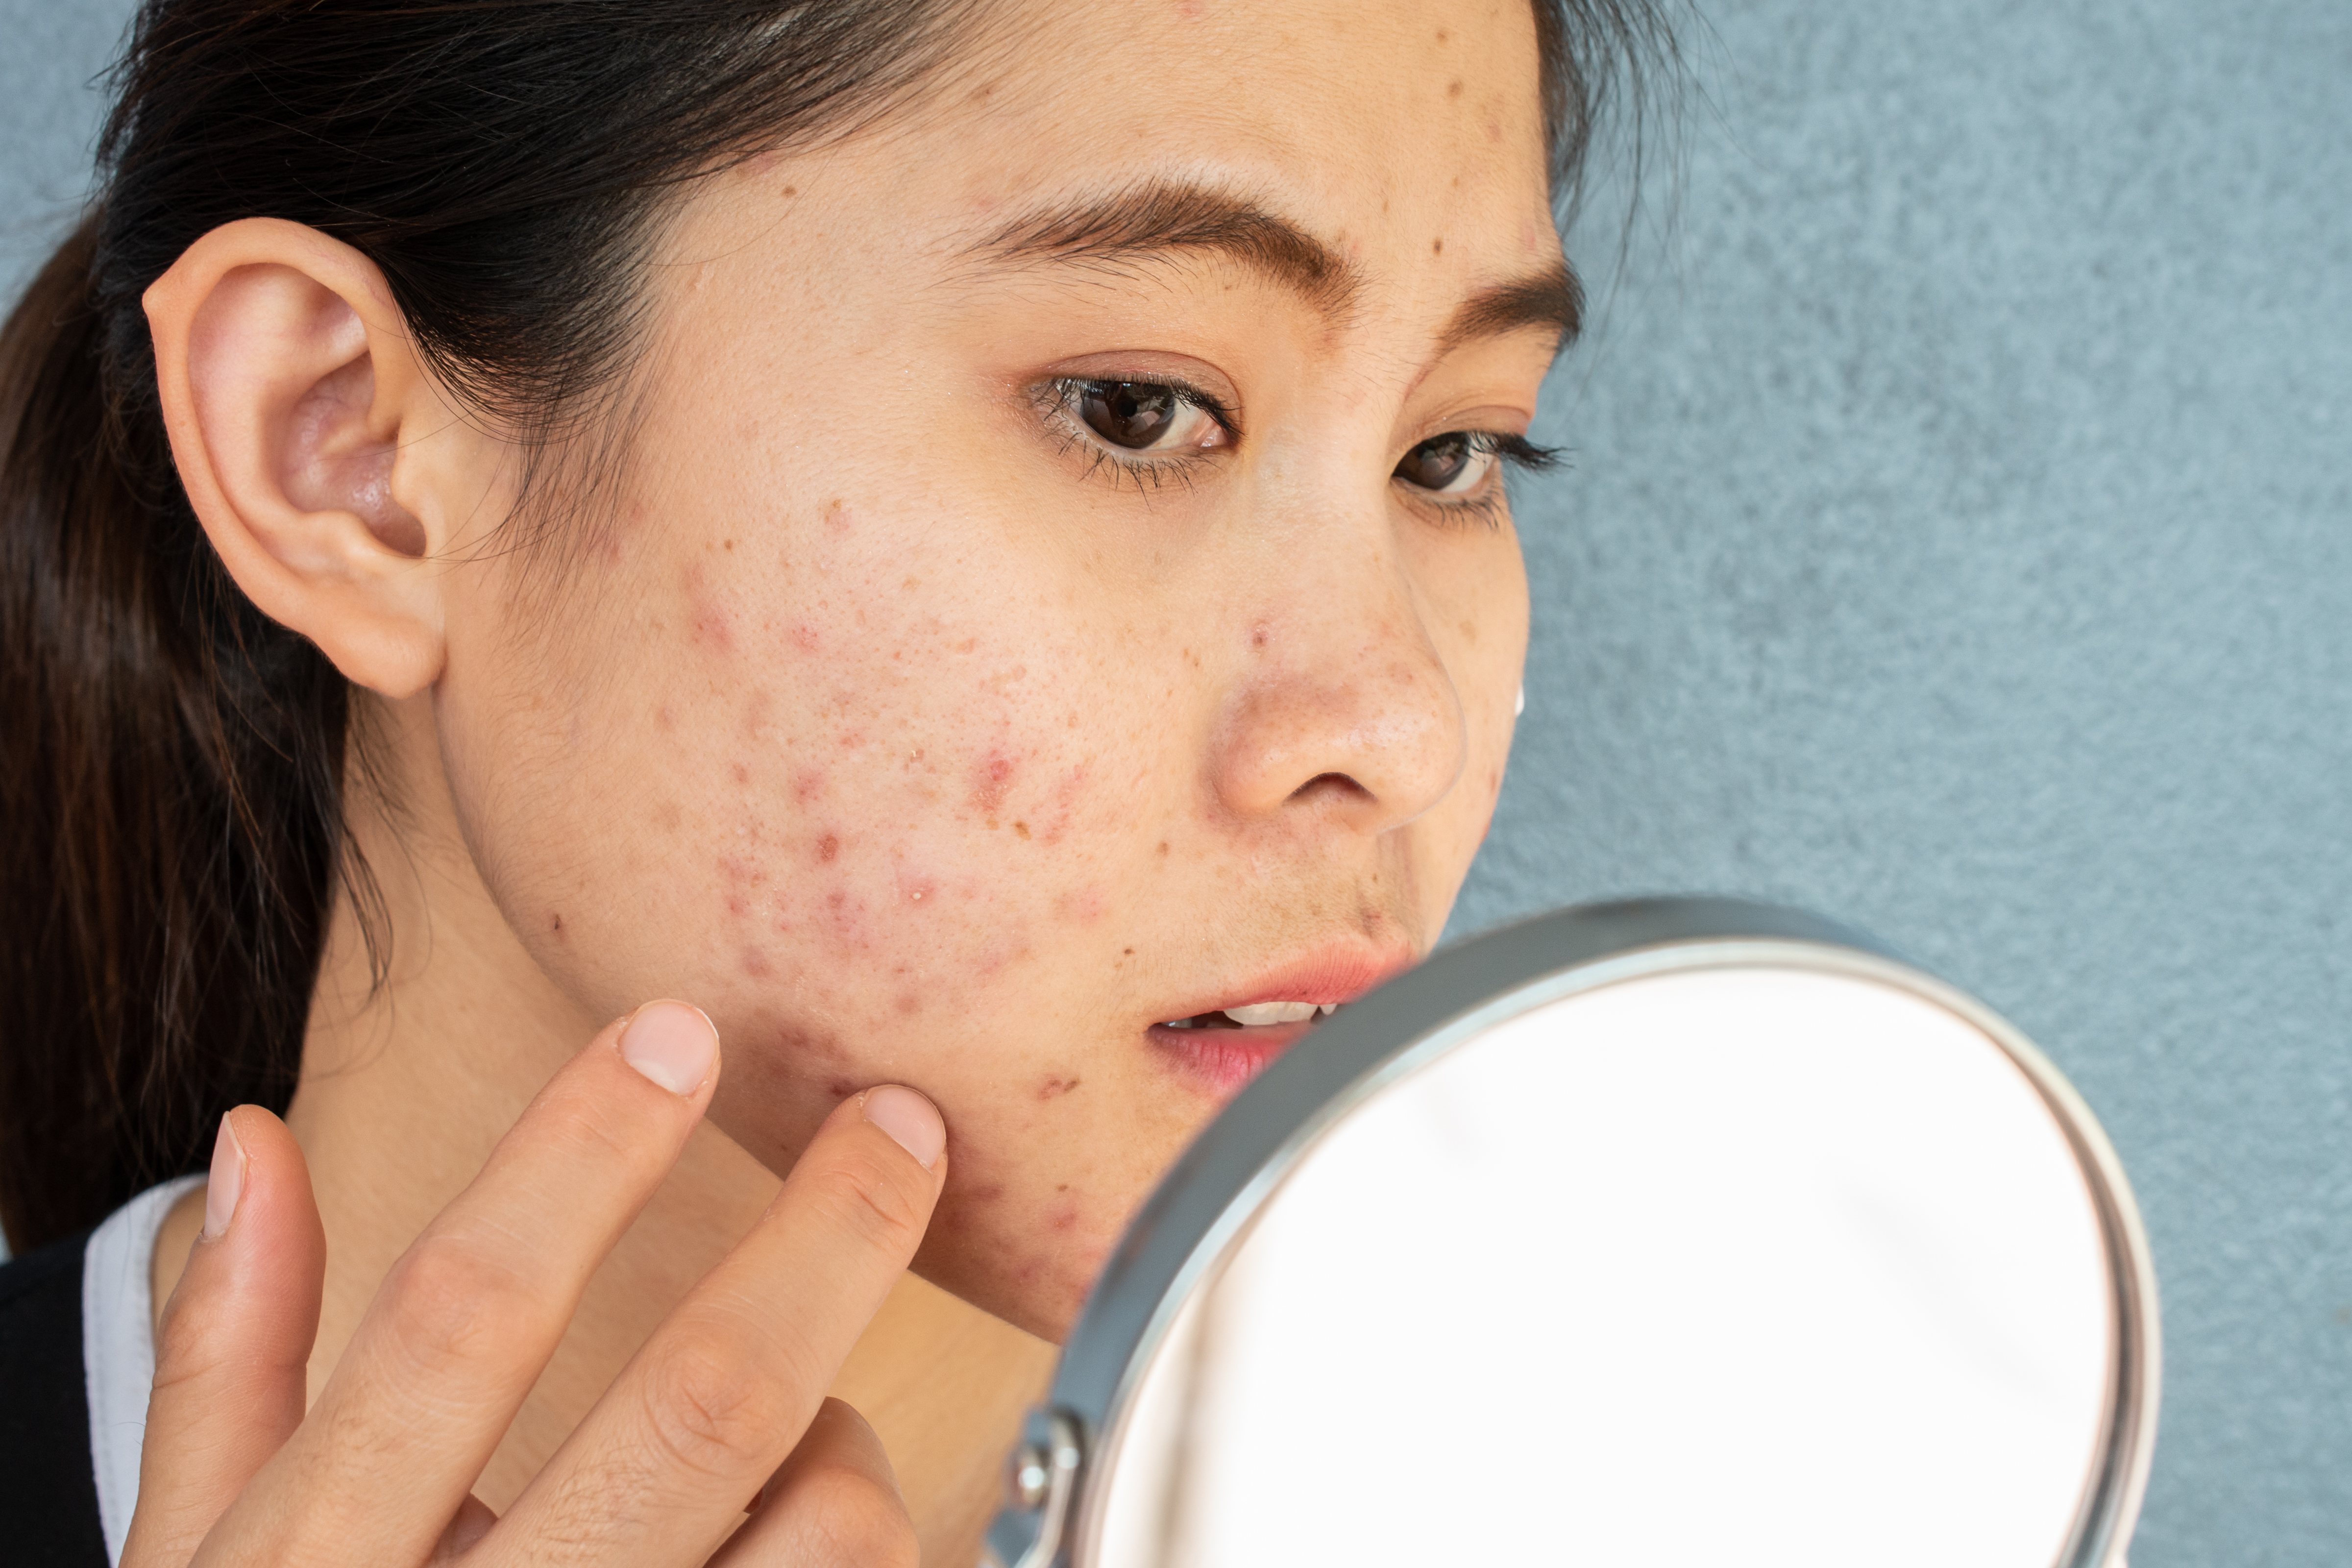 At What Age Does Acne Go Away?